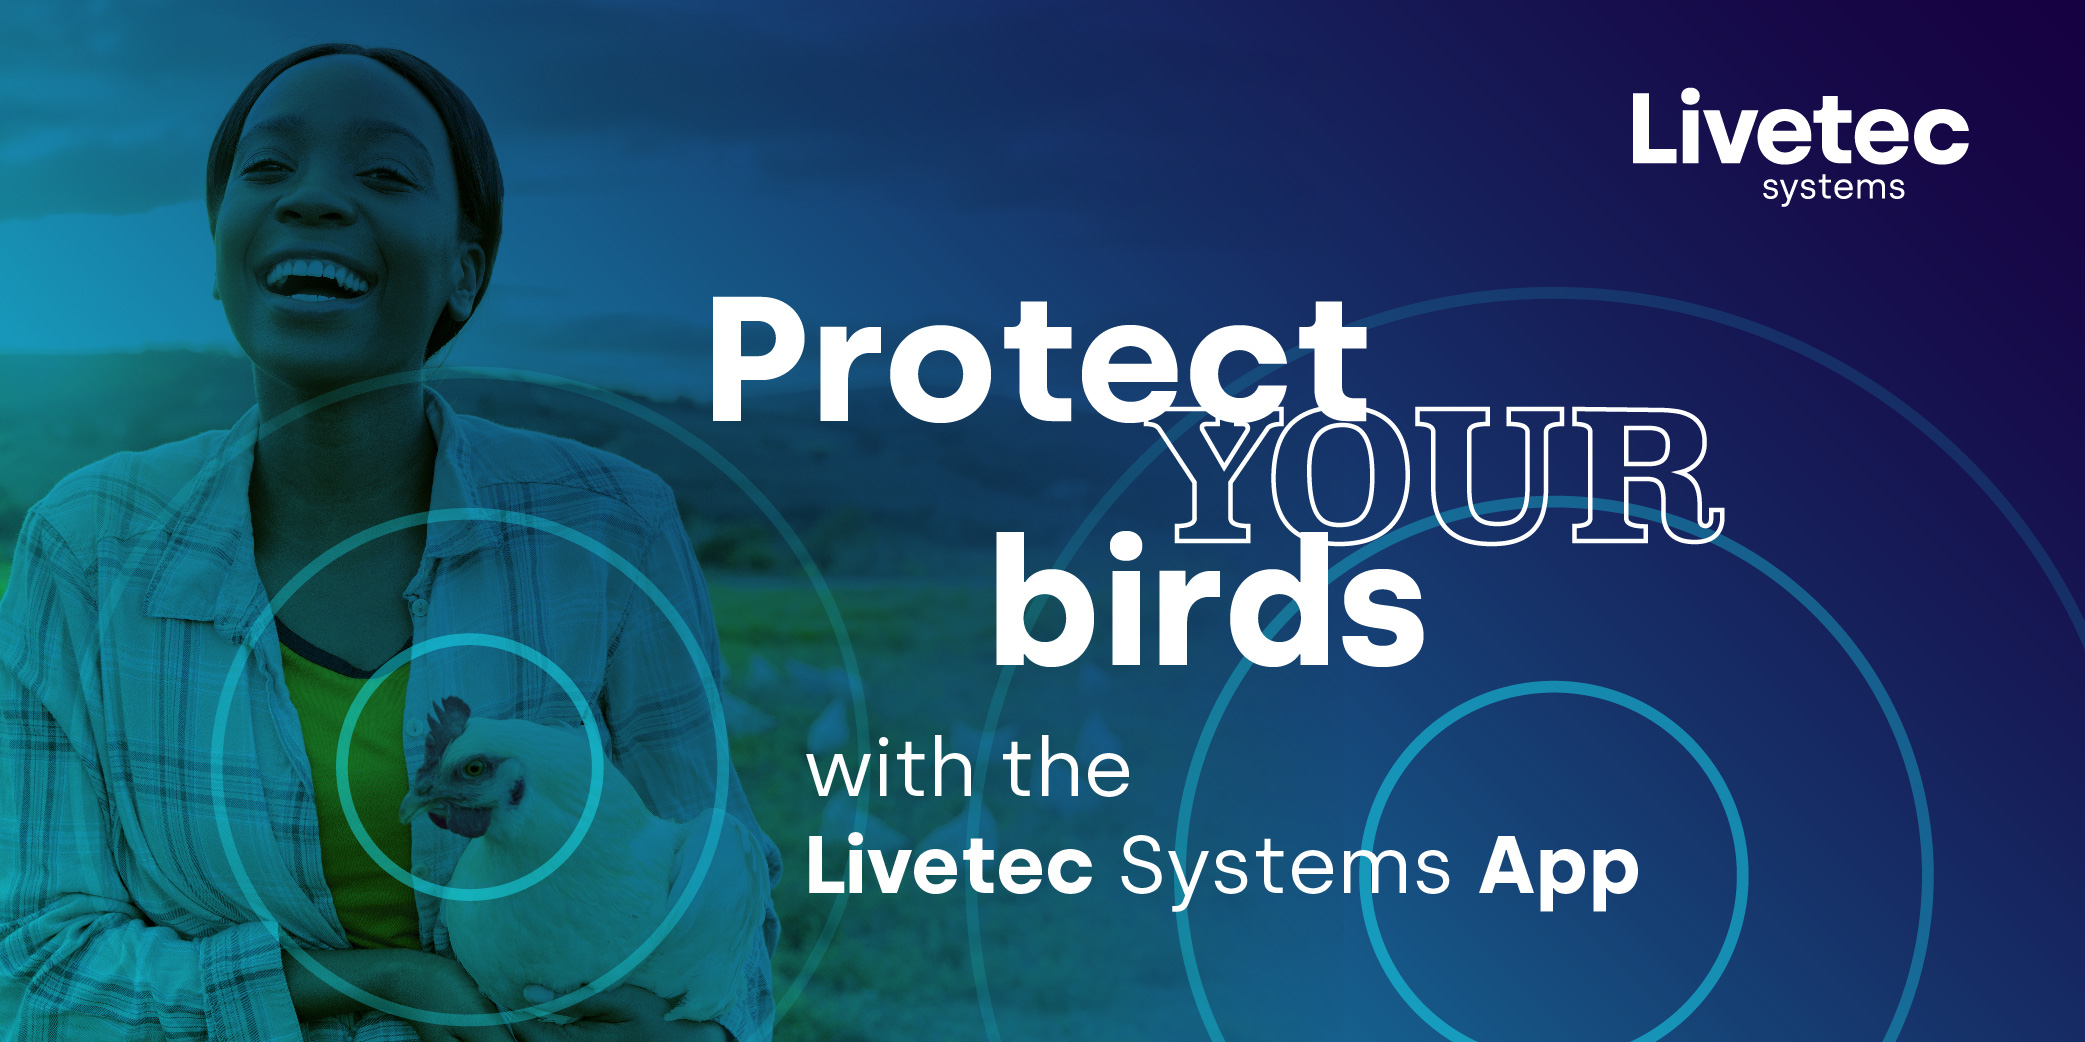 Protect your birds with the Livetec Systems app